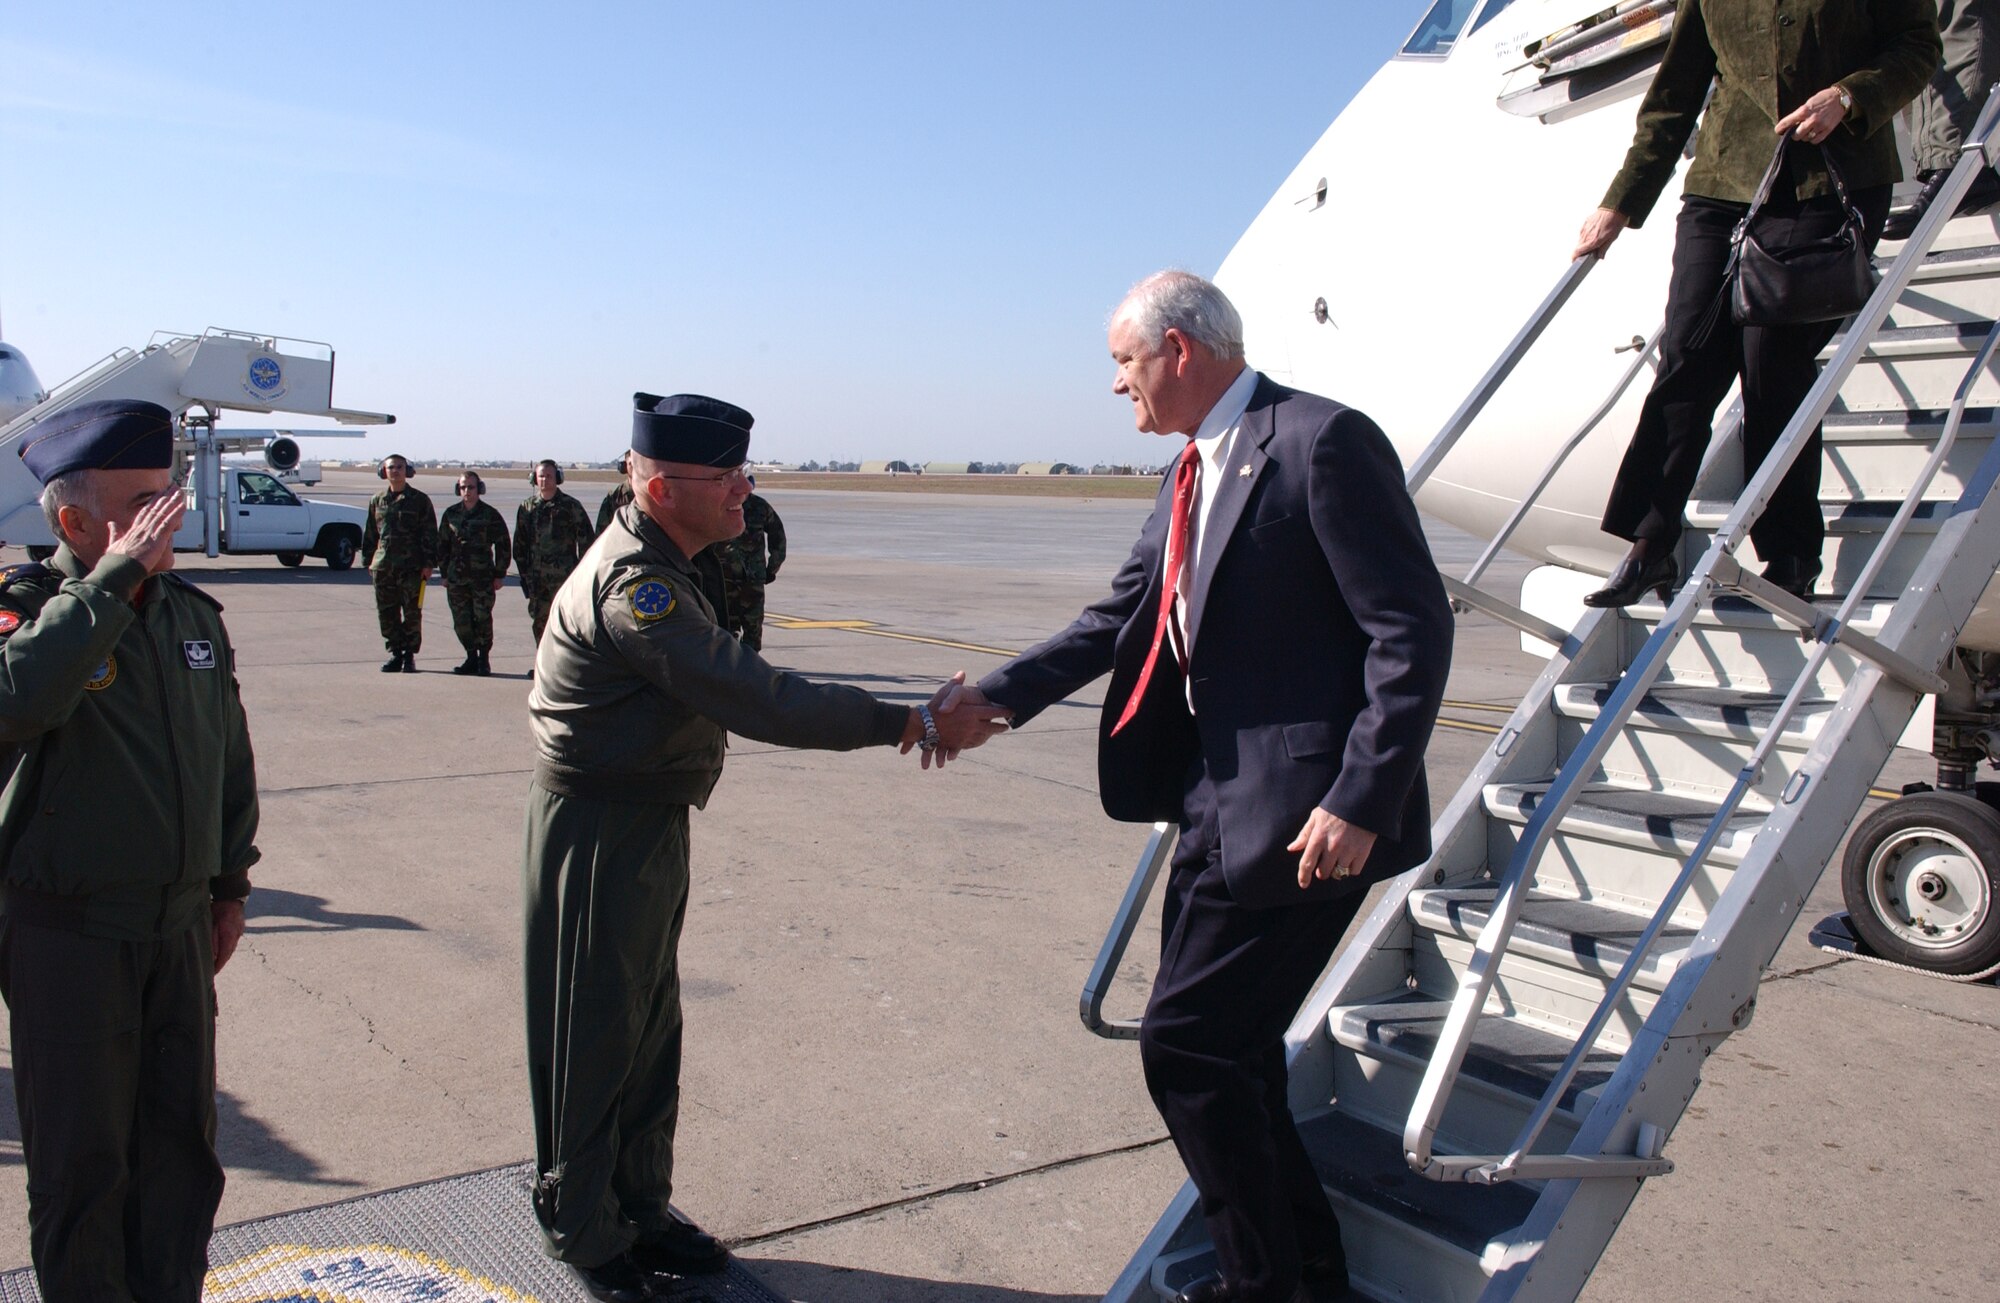 Secretary of the Air Force Michael Wynne shakes hands with Col. "Tip" Stinnette, 39th Air Base Wing commander, after landing here Tuesday. Secretary Wynne visited Incirlik and met with troops. (U.S. Air Force photo by Airman 1st Class Nathan Lipscomb